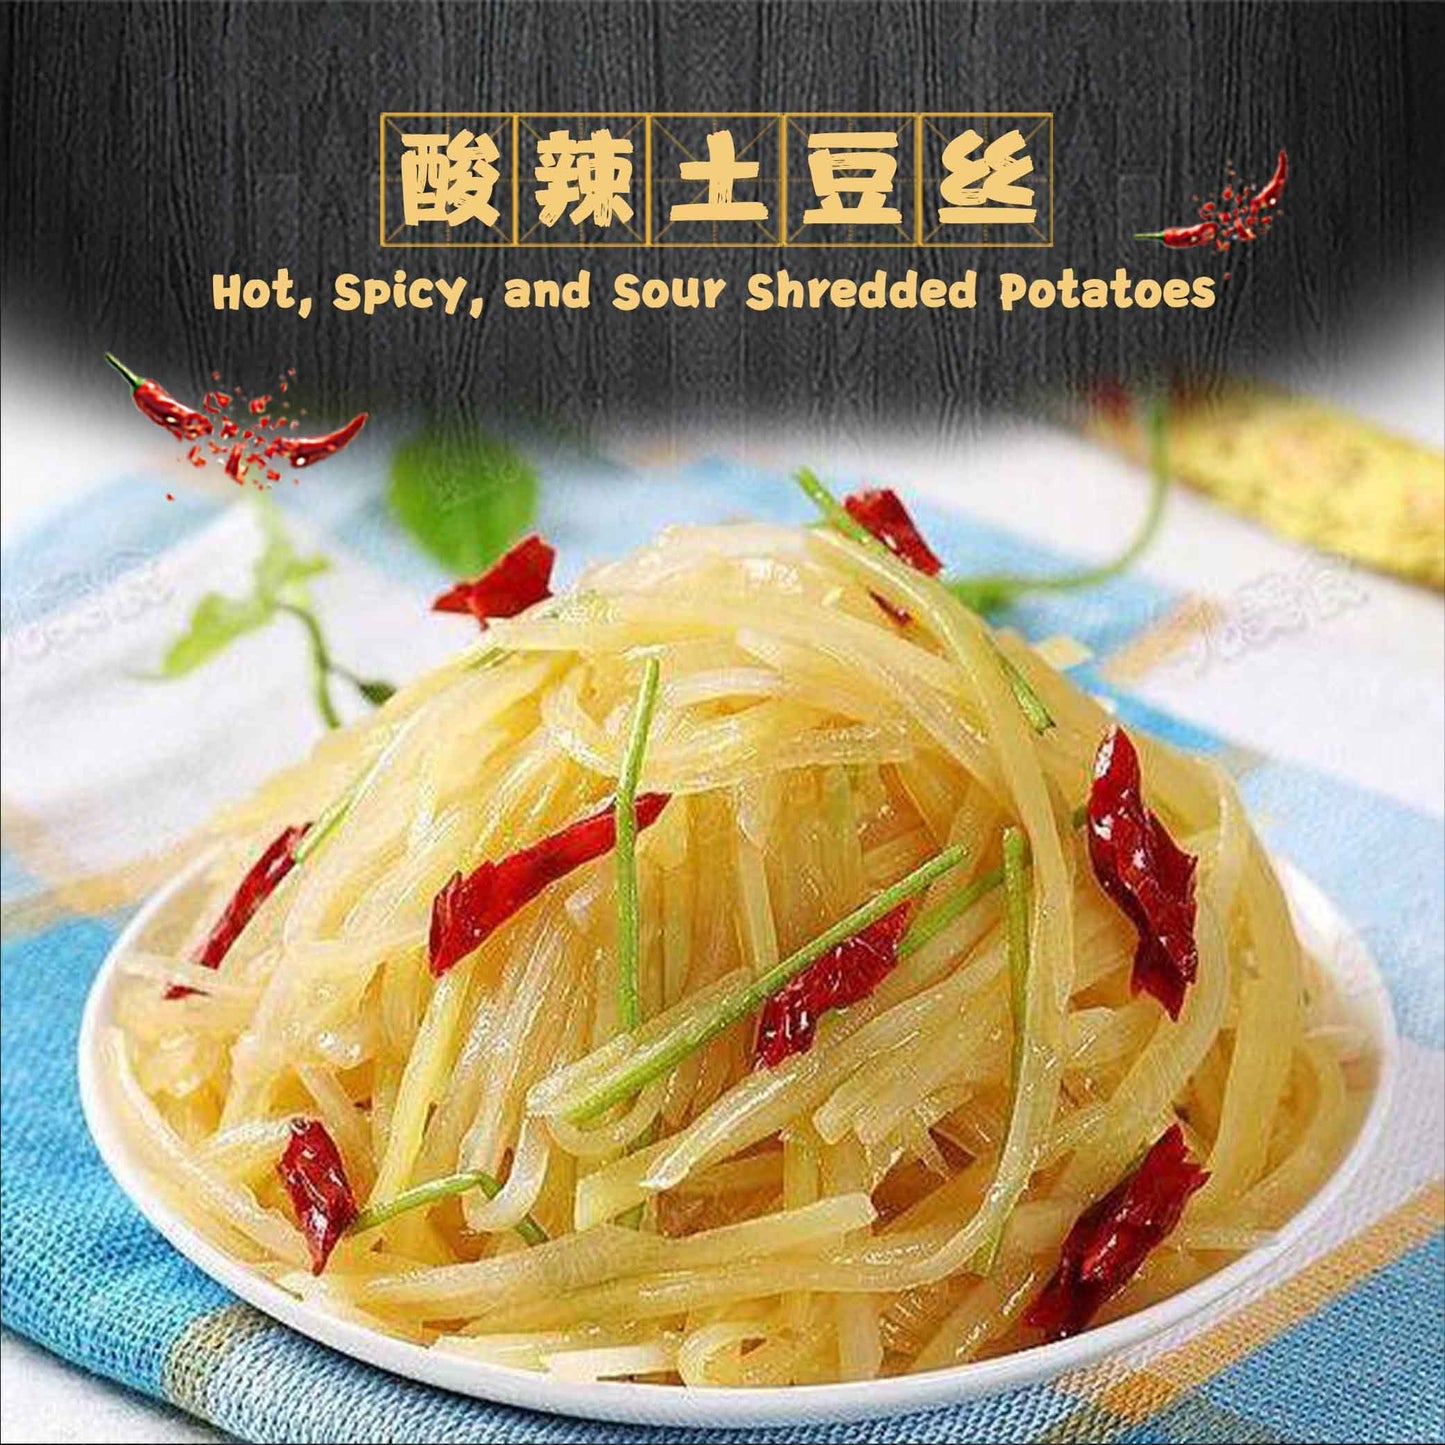 Hot, Spicy, and Sour Shredded Potatoes / 酸辣土豆丝